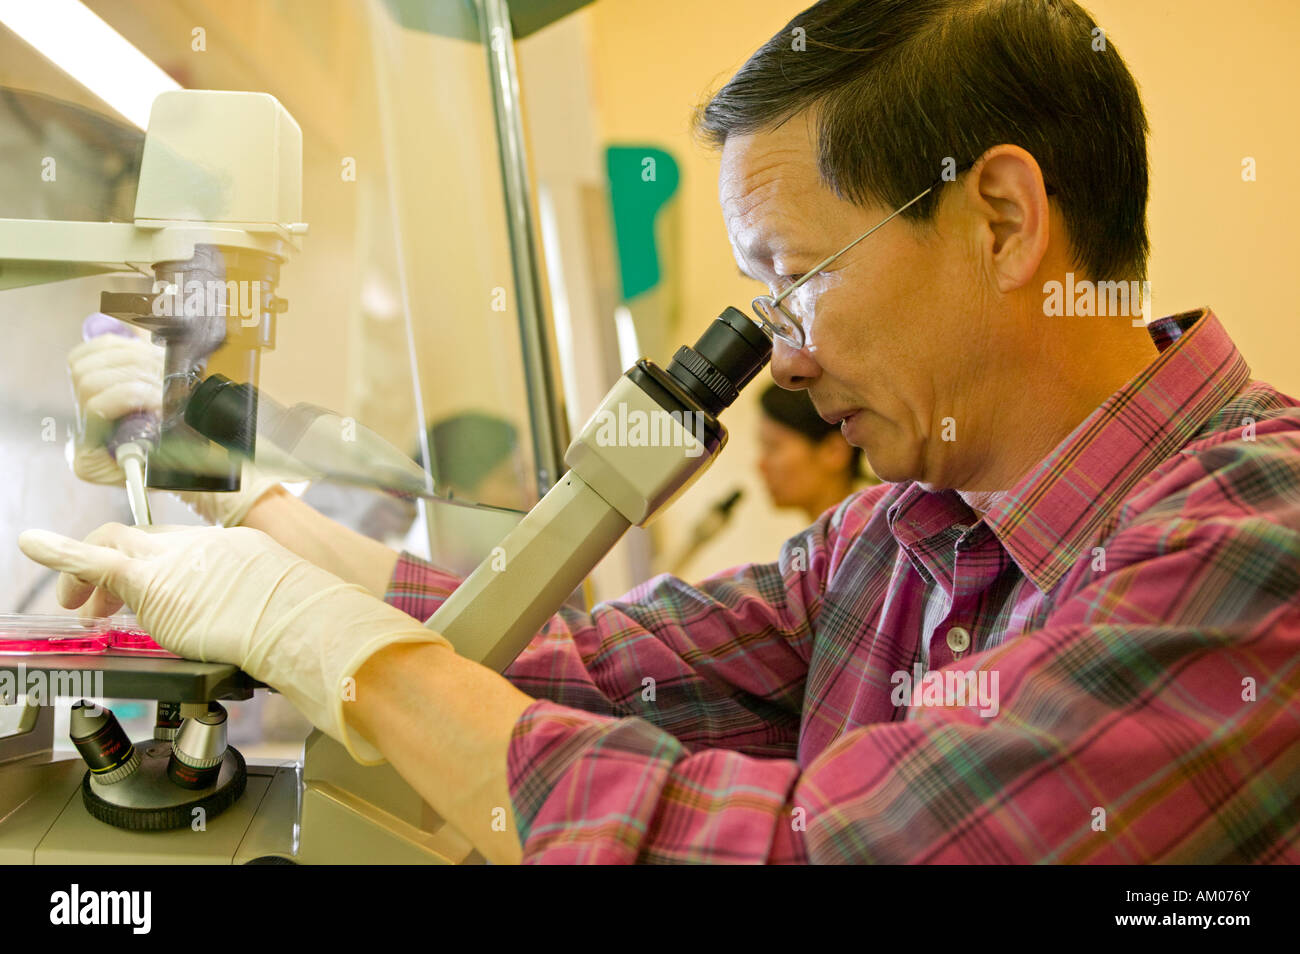 Medical researcher examining islet cells in a fume hood Stock Photo